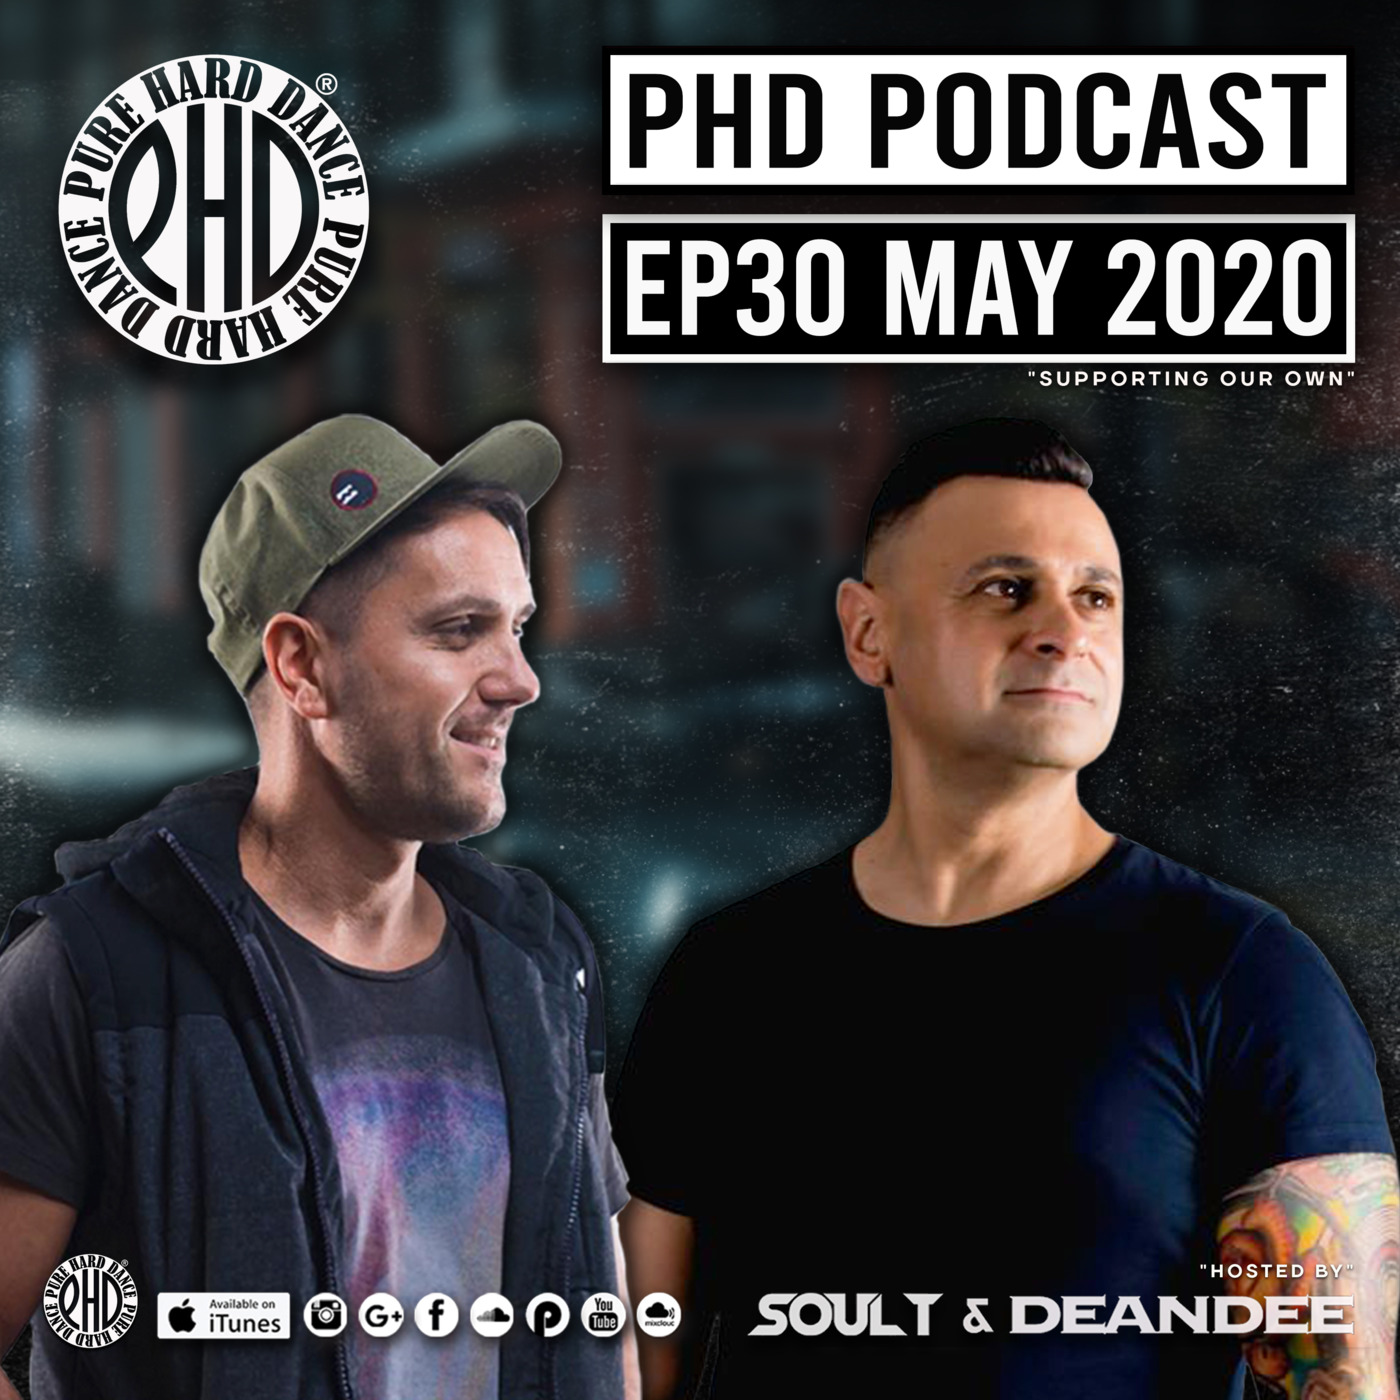 EP30 PHD PODCAST MAY 2020 HOSTED BY SOUL T & DEAN DEE